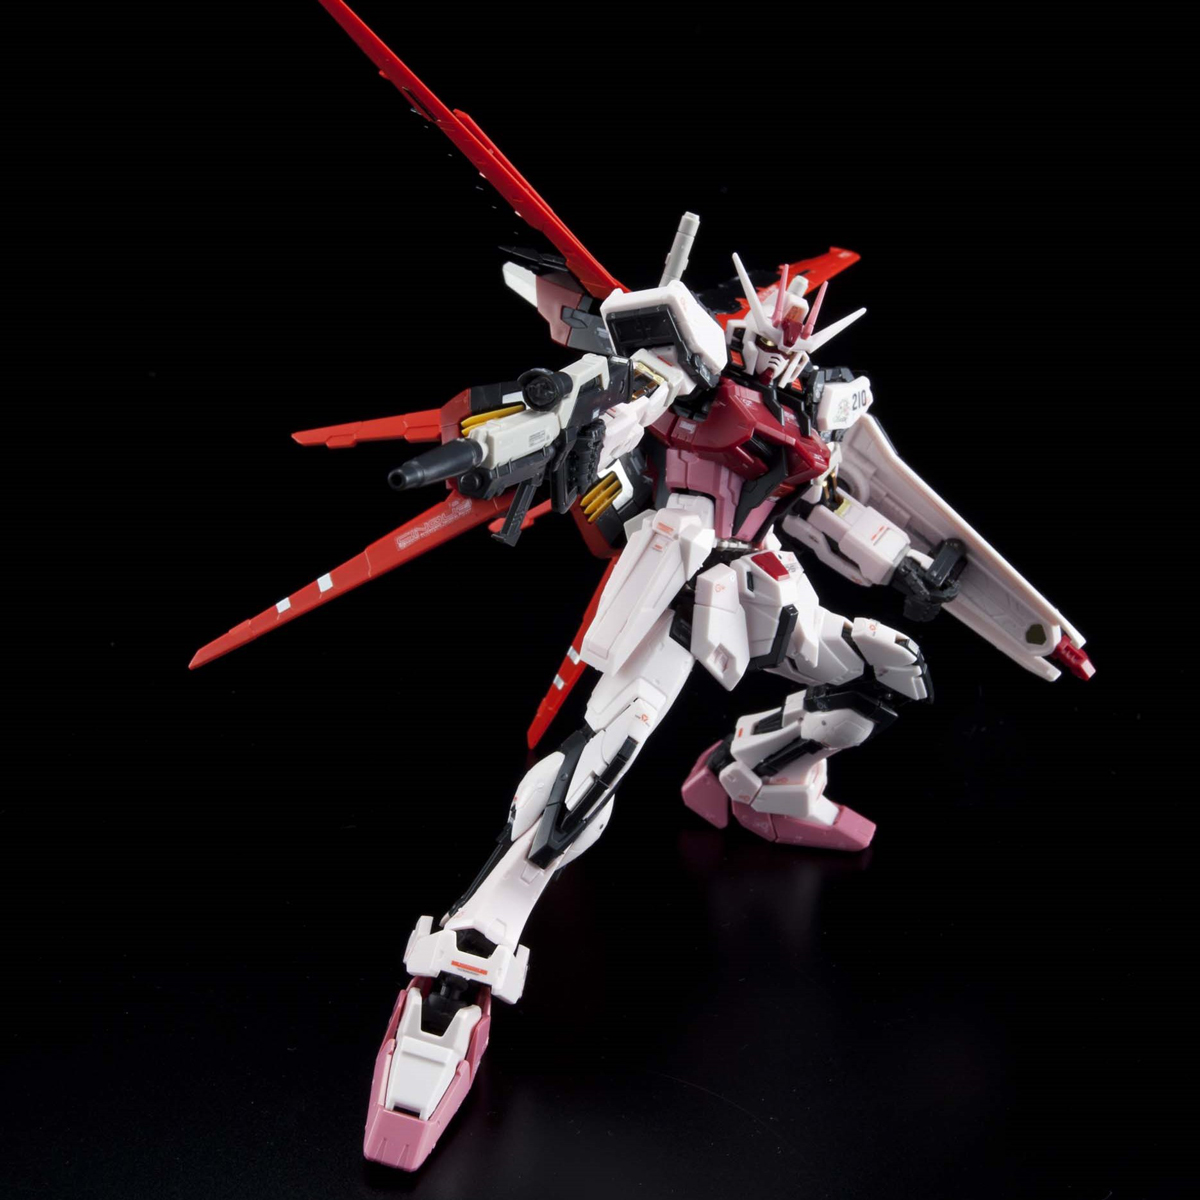 Bandai Hobby HGCE Strike Rouge Model Kit 1/144 Scale 4543112891624 Ban189162 for sale online 